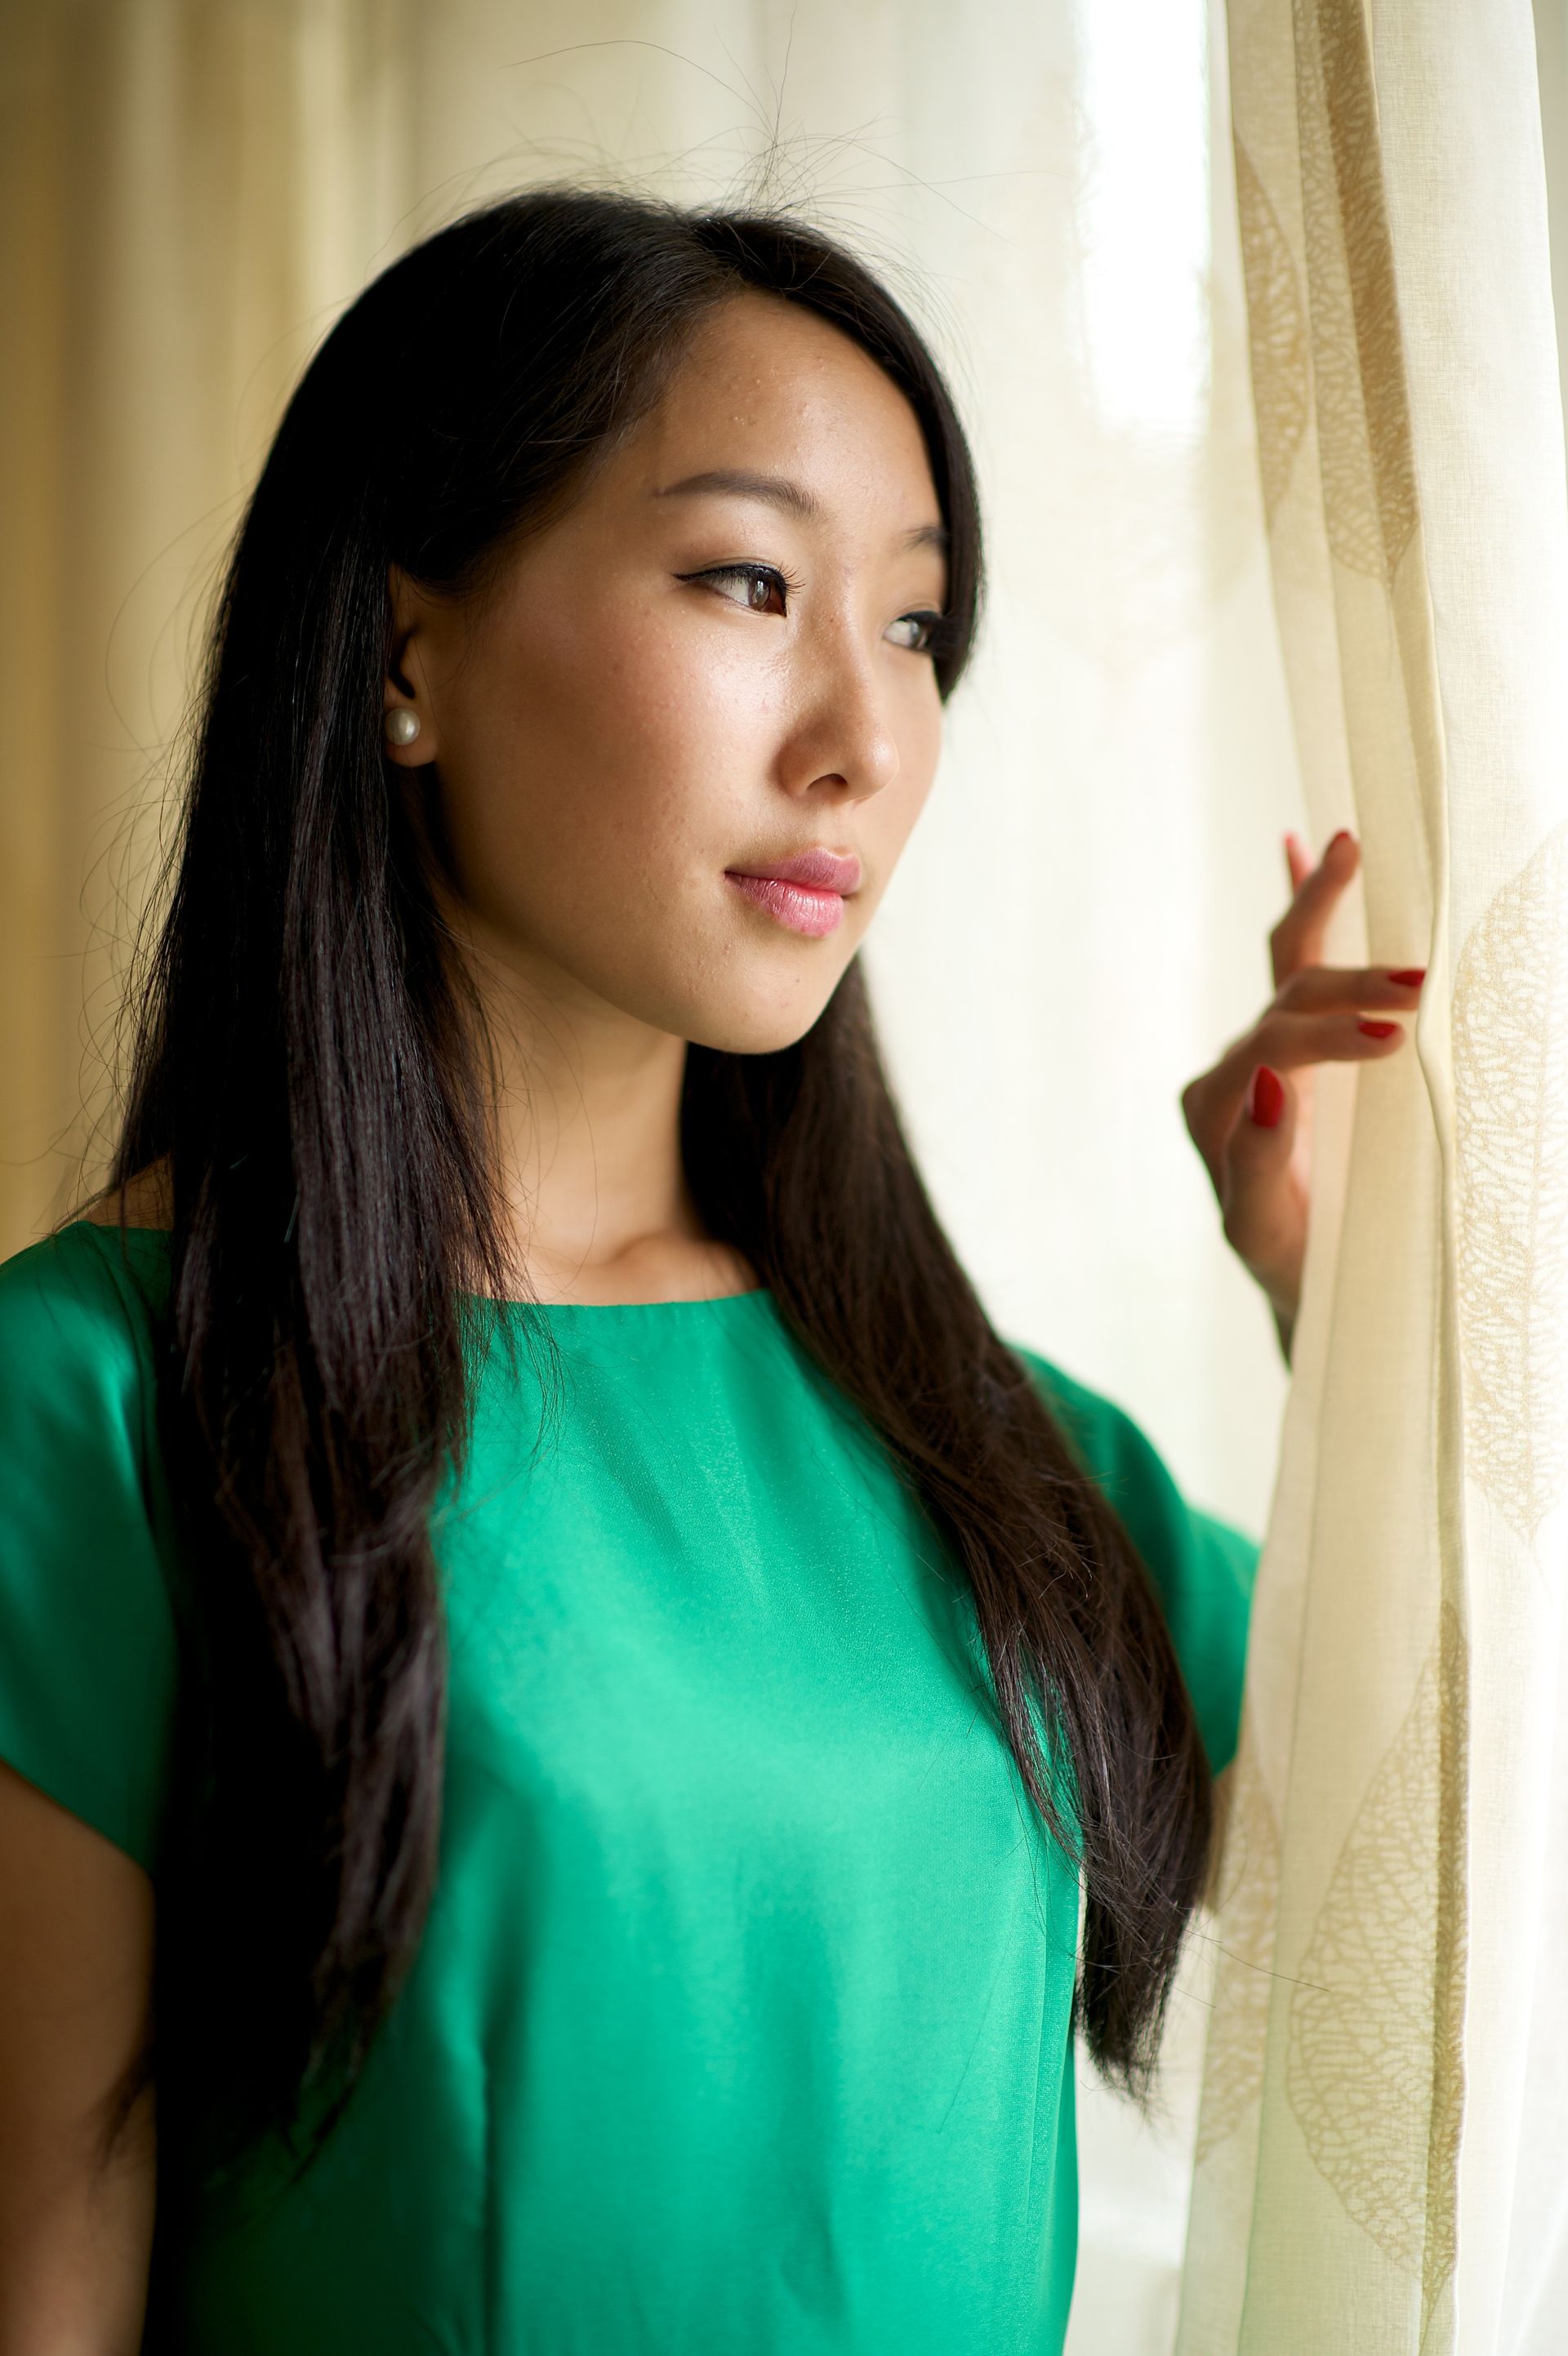 A young woman in Mongolia holds a curtain open and looks out a window.